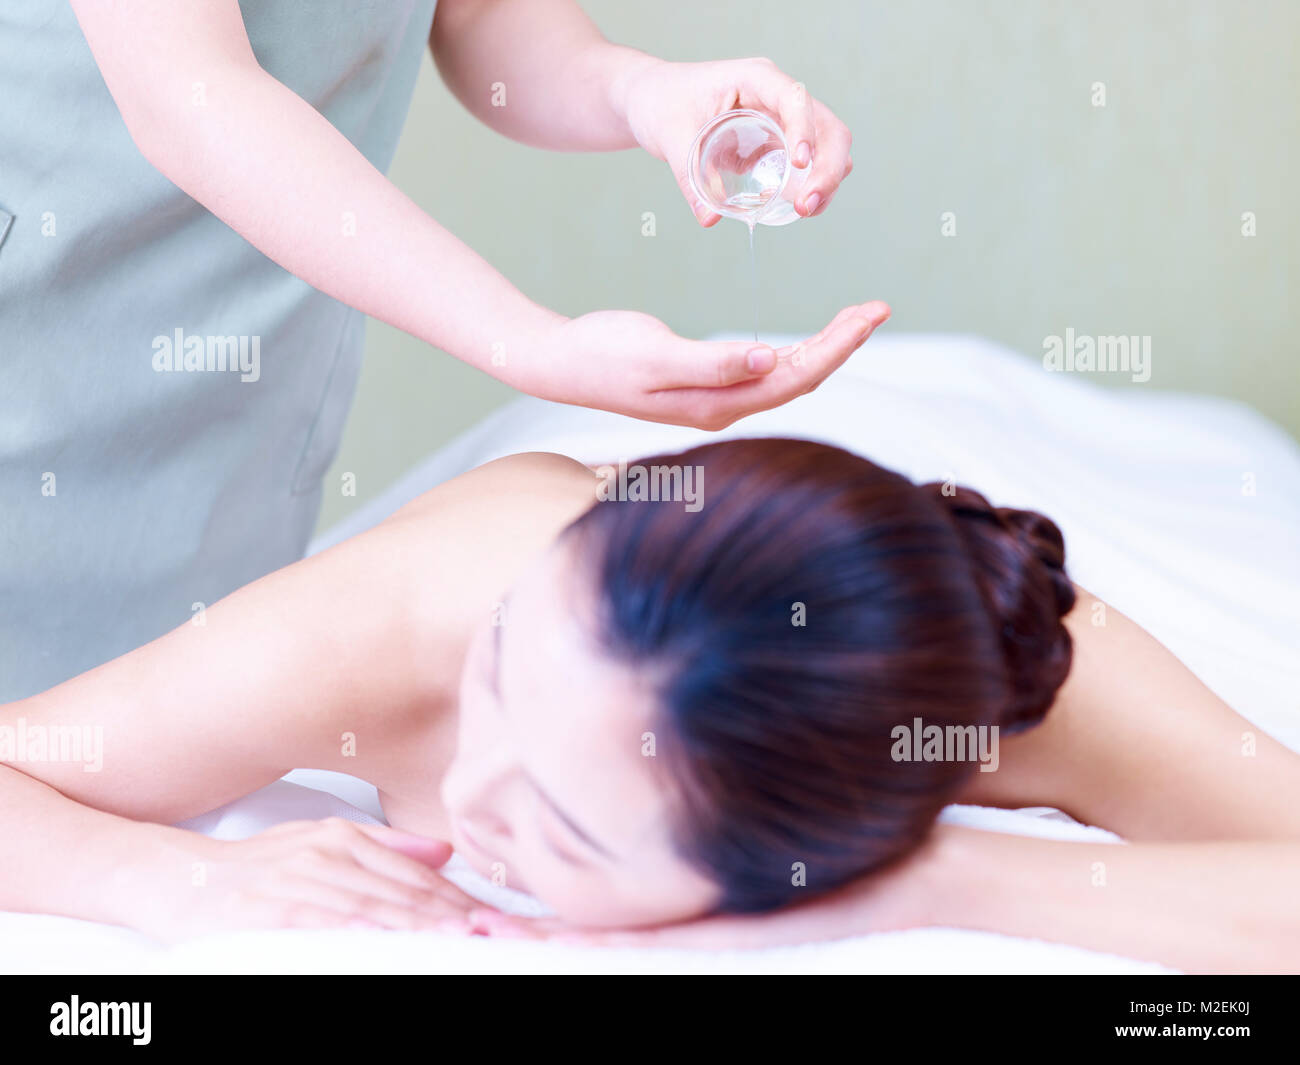 masseuse pouring essential oil on hand while young asian woman lying on front on massage bed. Stock Photo